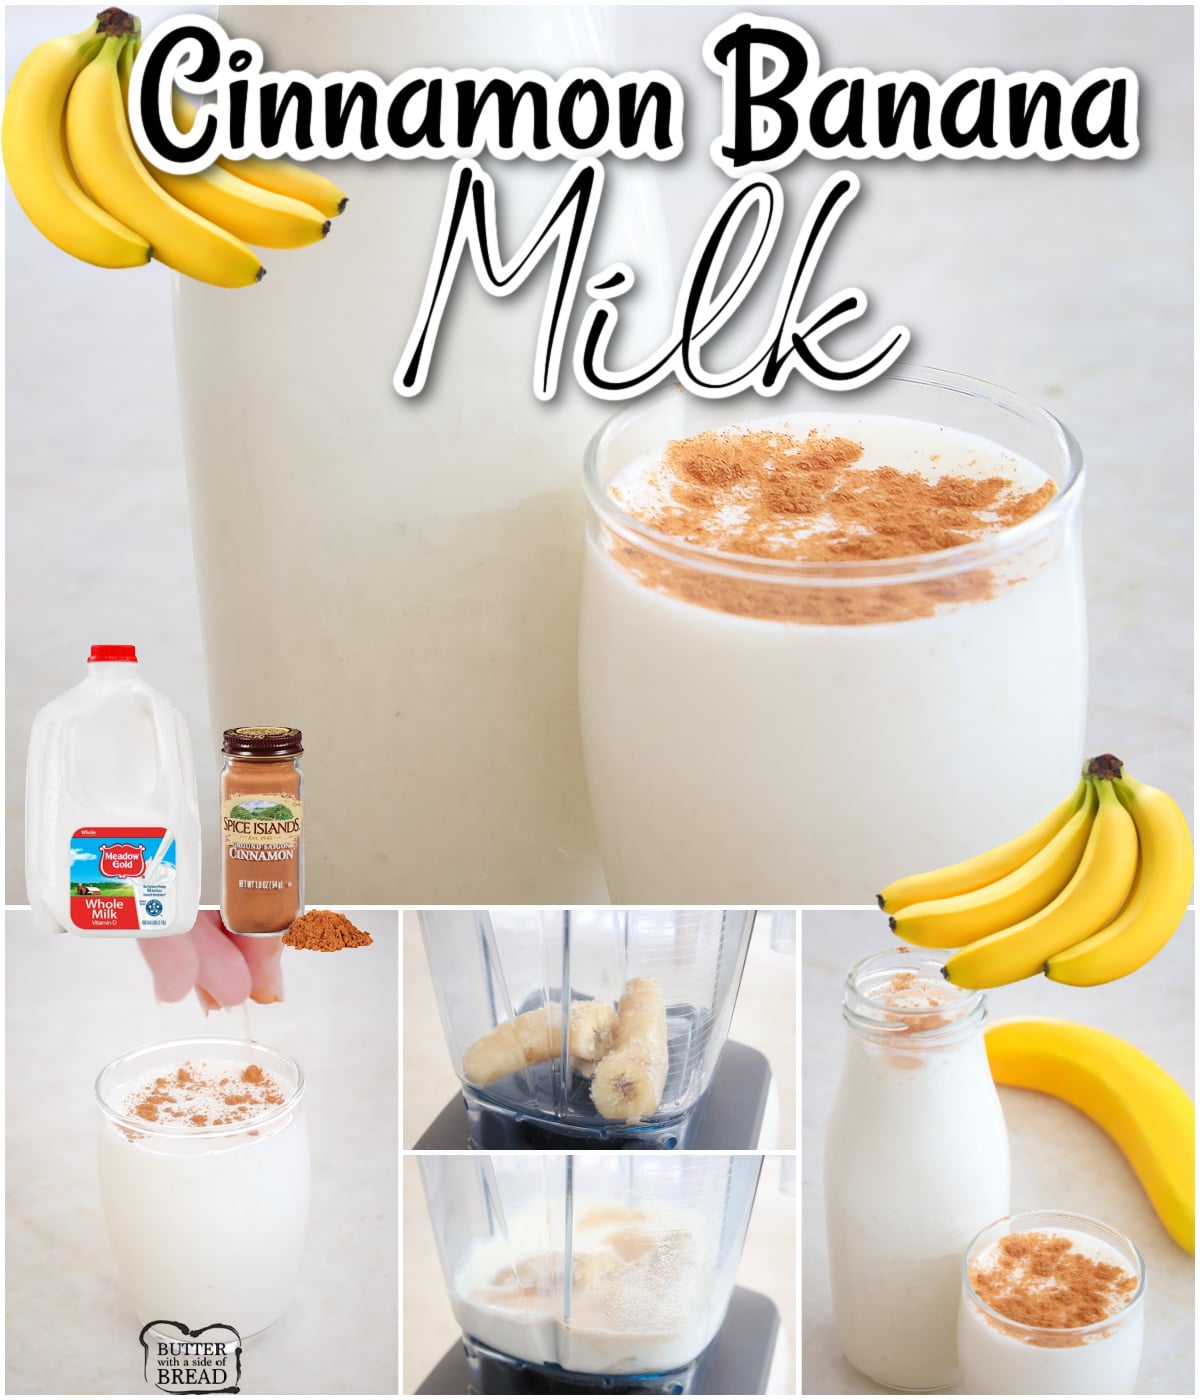 Quick & easy Cinnamon Banana Milk is made with just 5 ingredients & is done in a few minutes! This banana milk is a tasty after school snack that everyone enjoys!